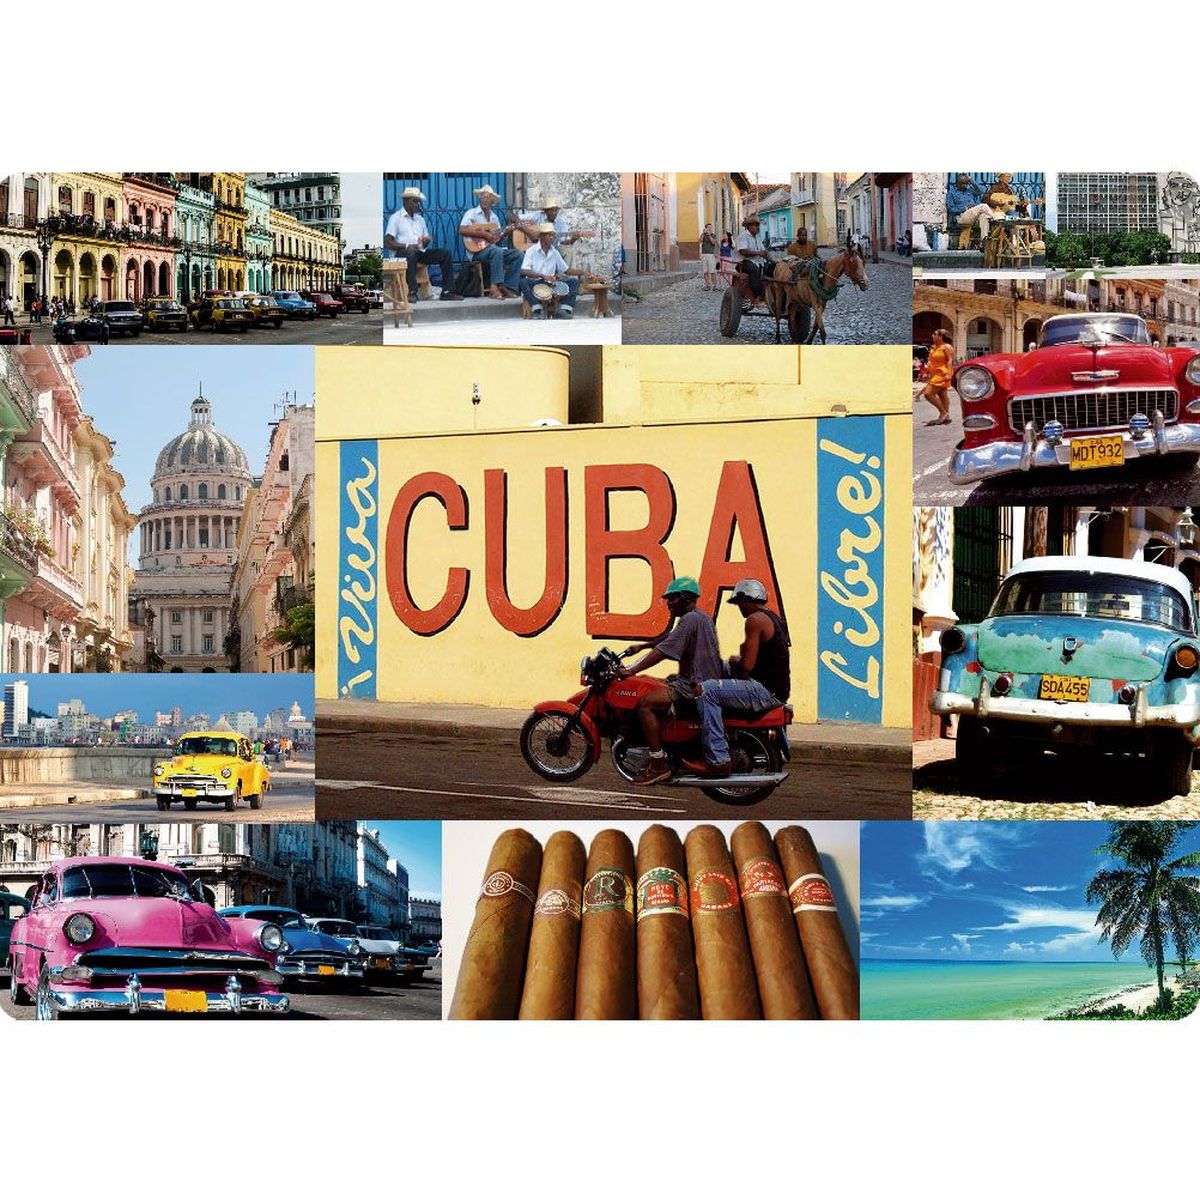 Cuba mouse pad by Cbkreation